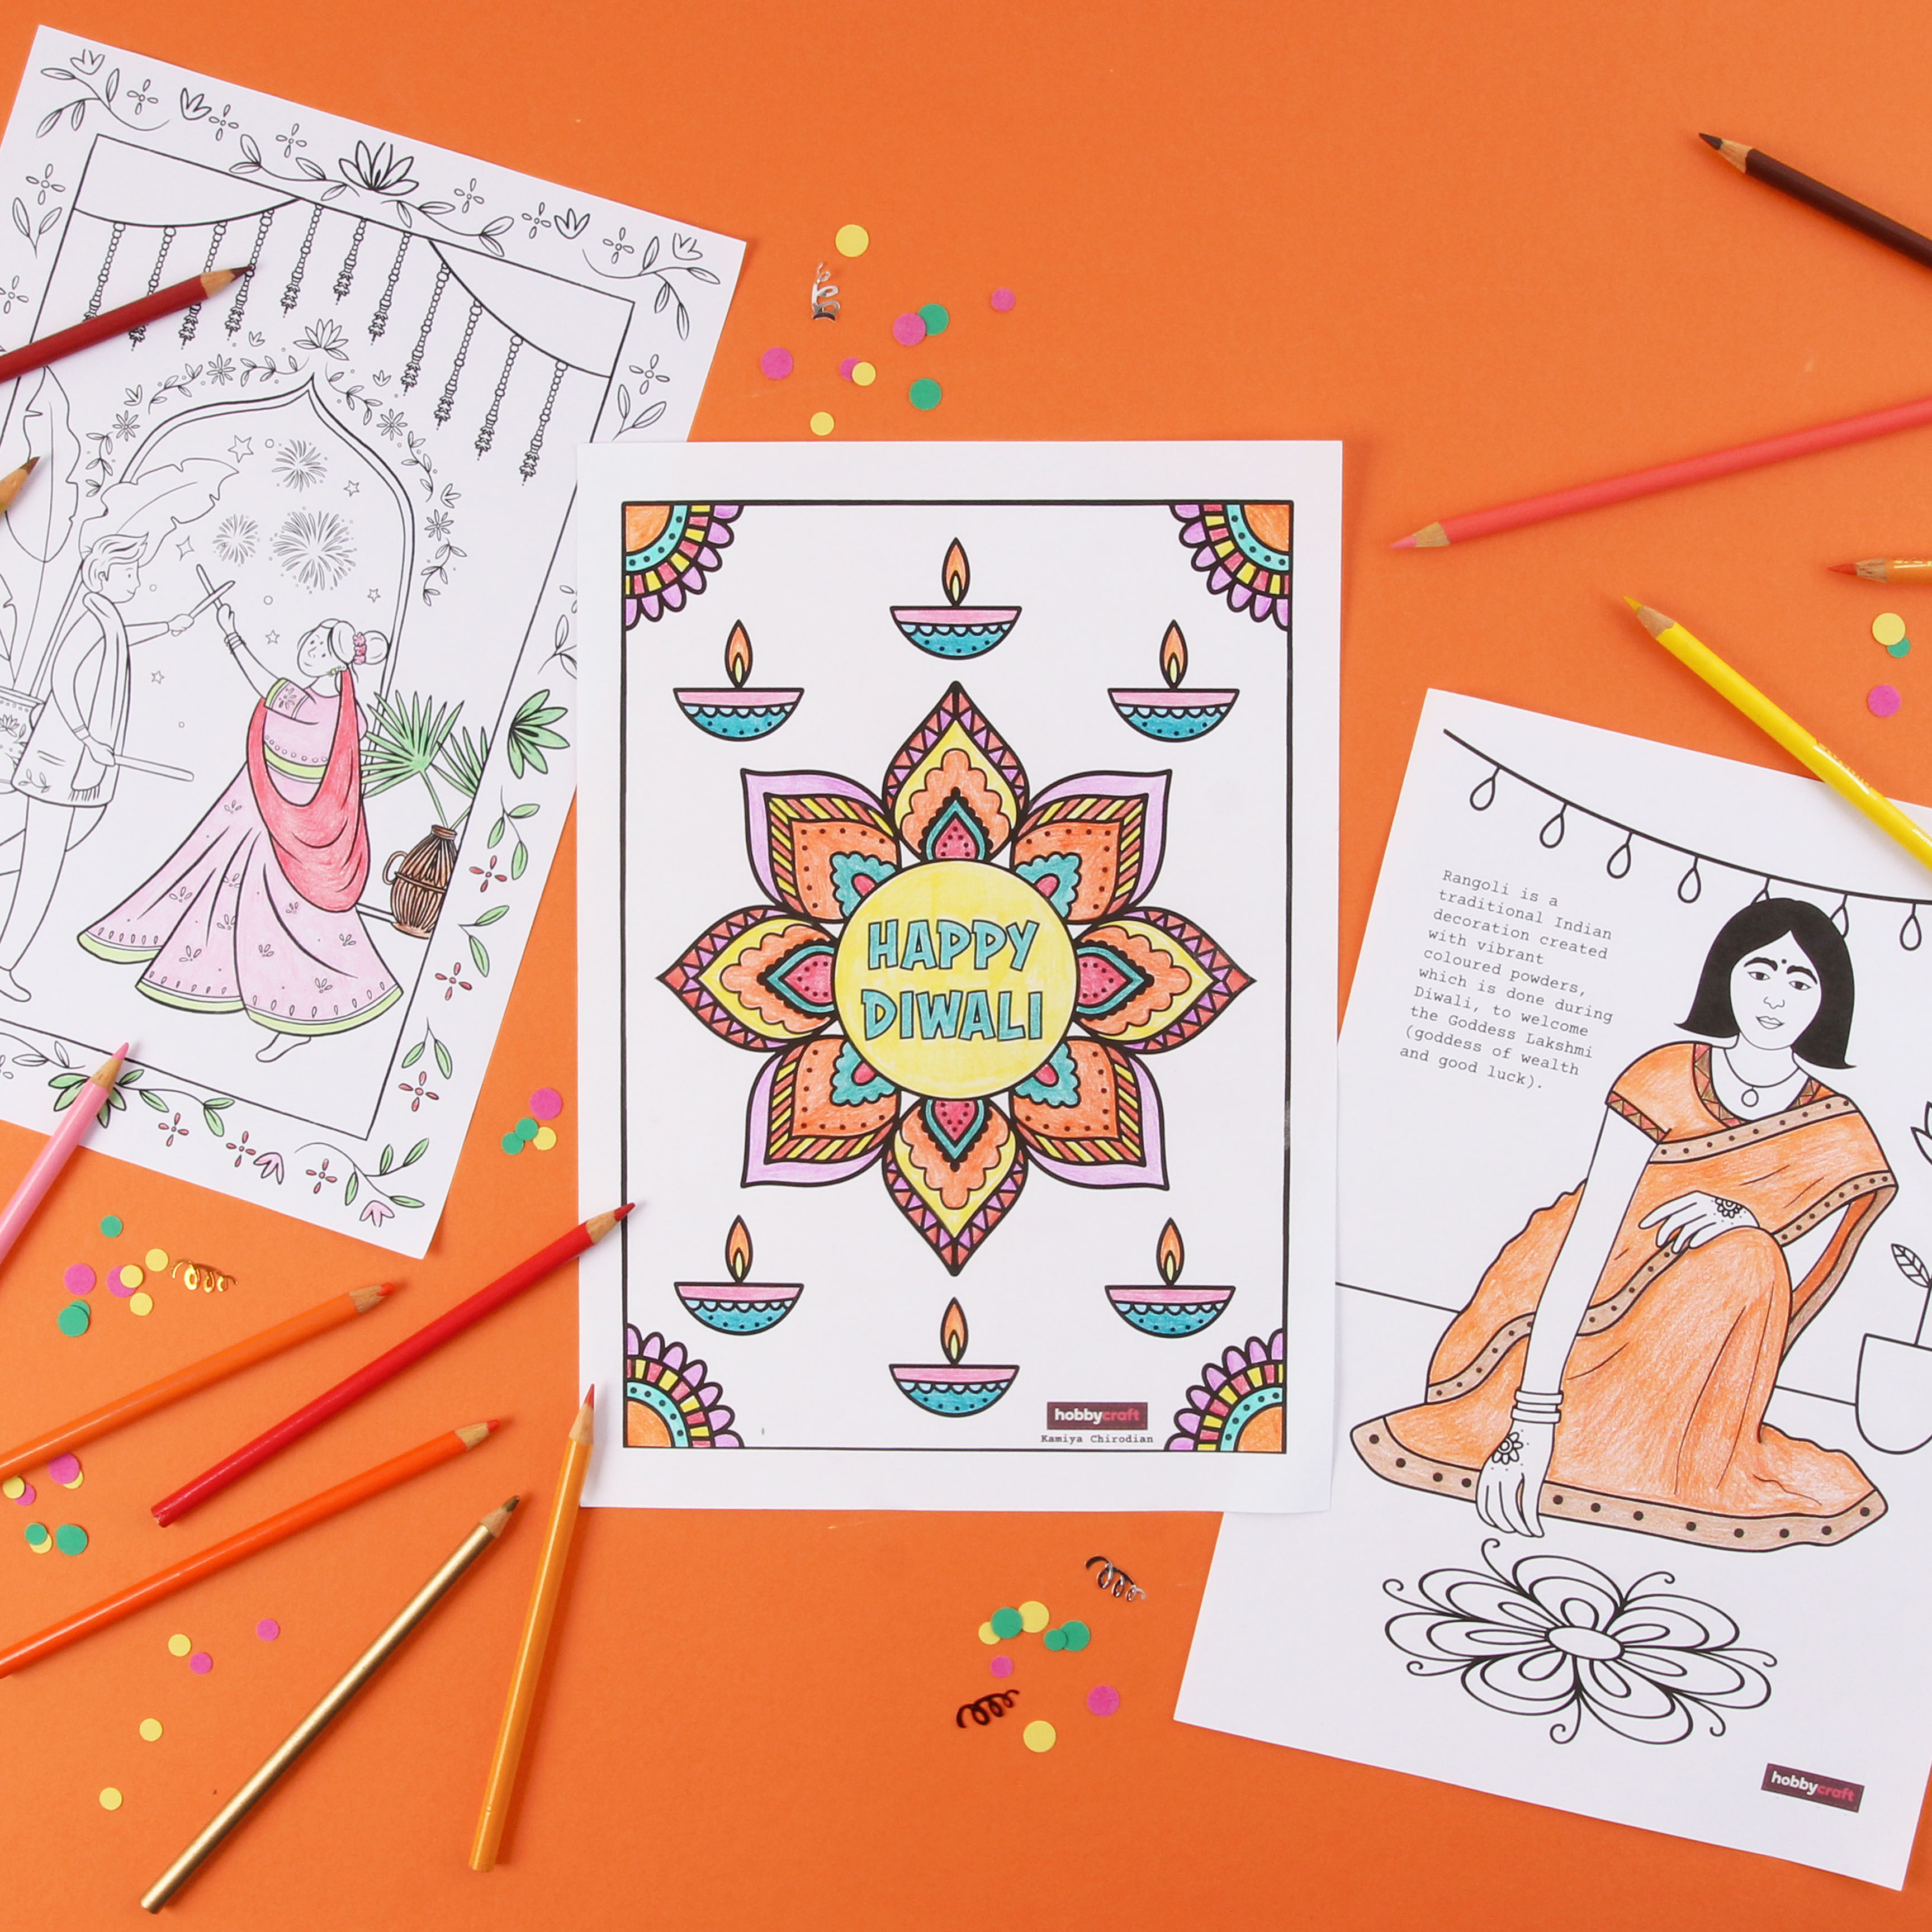 How to draw diwali festival easy step by step | how to draw diwali festival  easy step by step #artuncle #howtodraw #diwalidrawing #diwalicards  #painting #greetingcards #diwaliwishes #diwalispecial... | By ART UNCLE |  Facebook